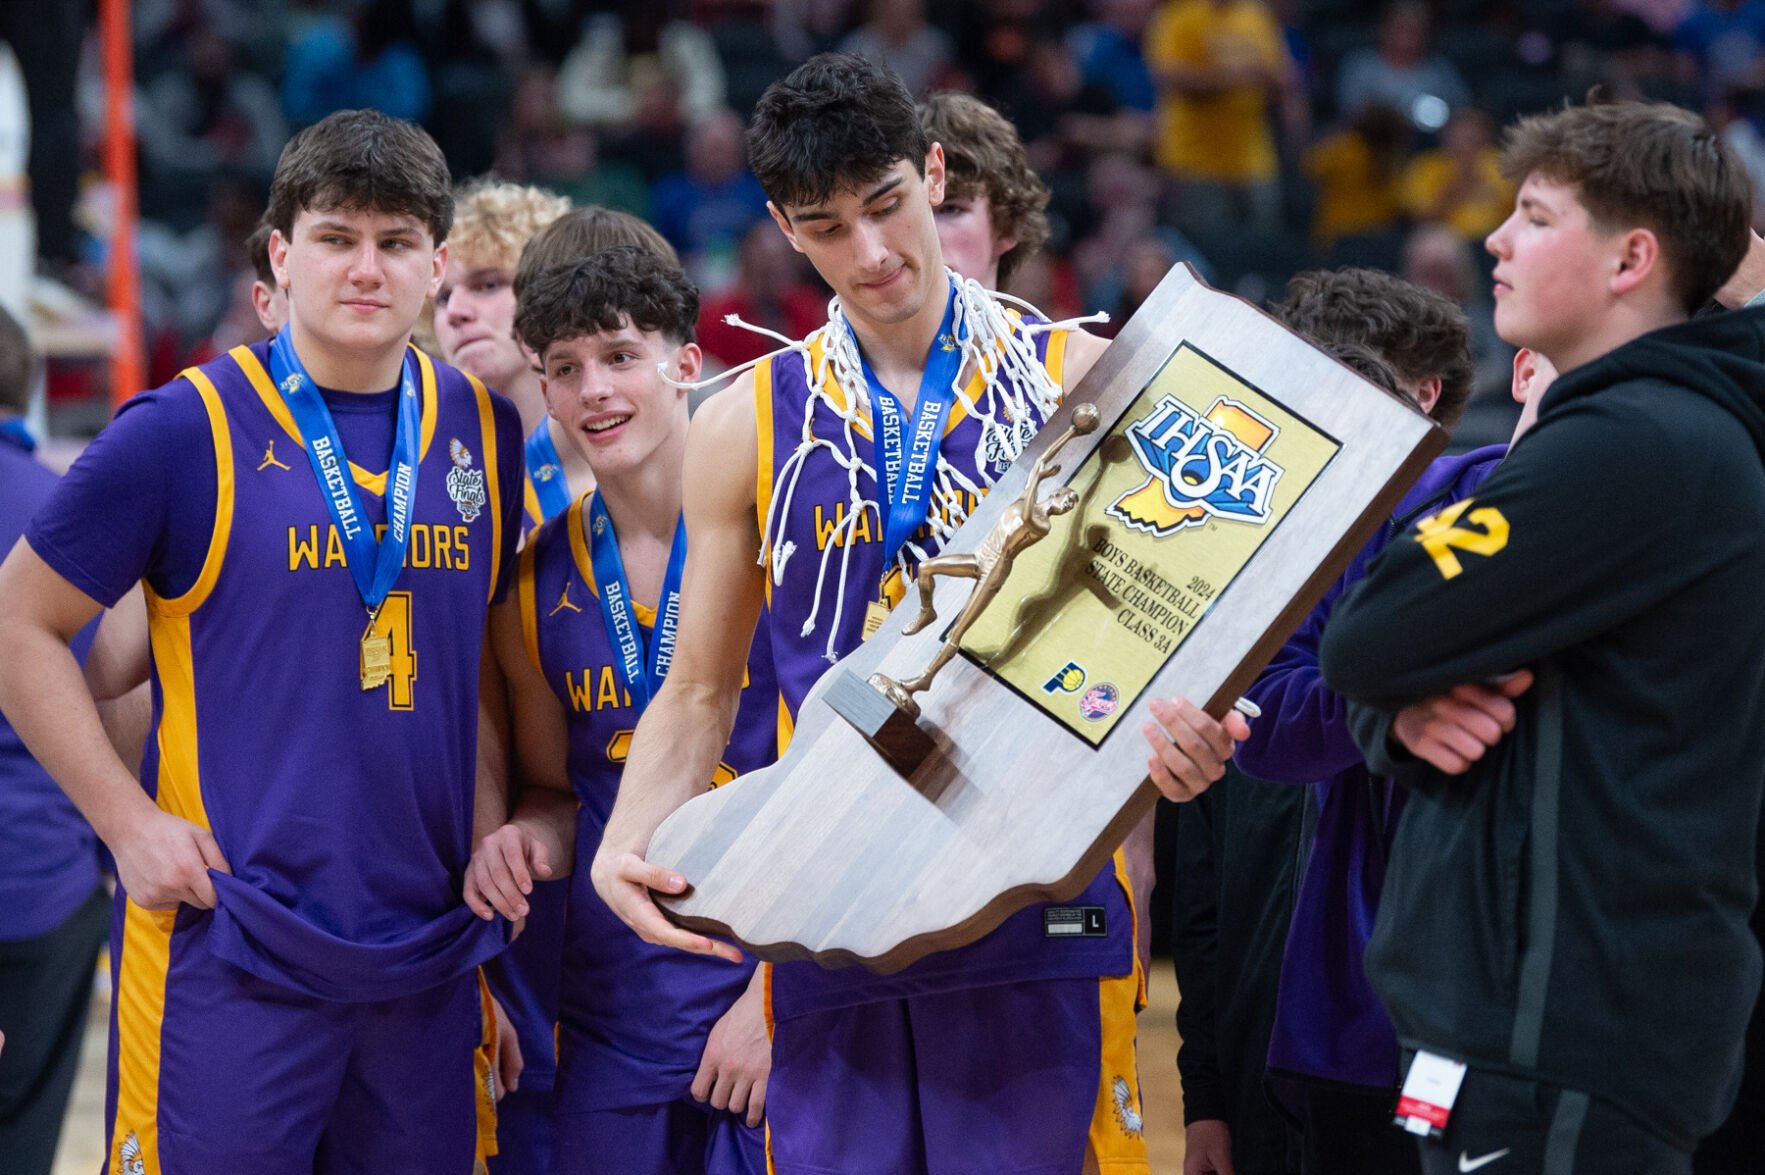 Jack Miller Makes Indiana All-Star Team After State Championship Win